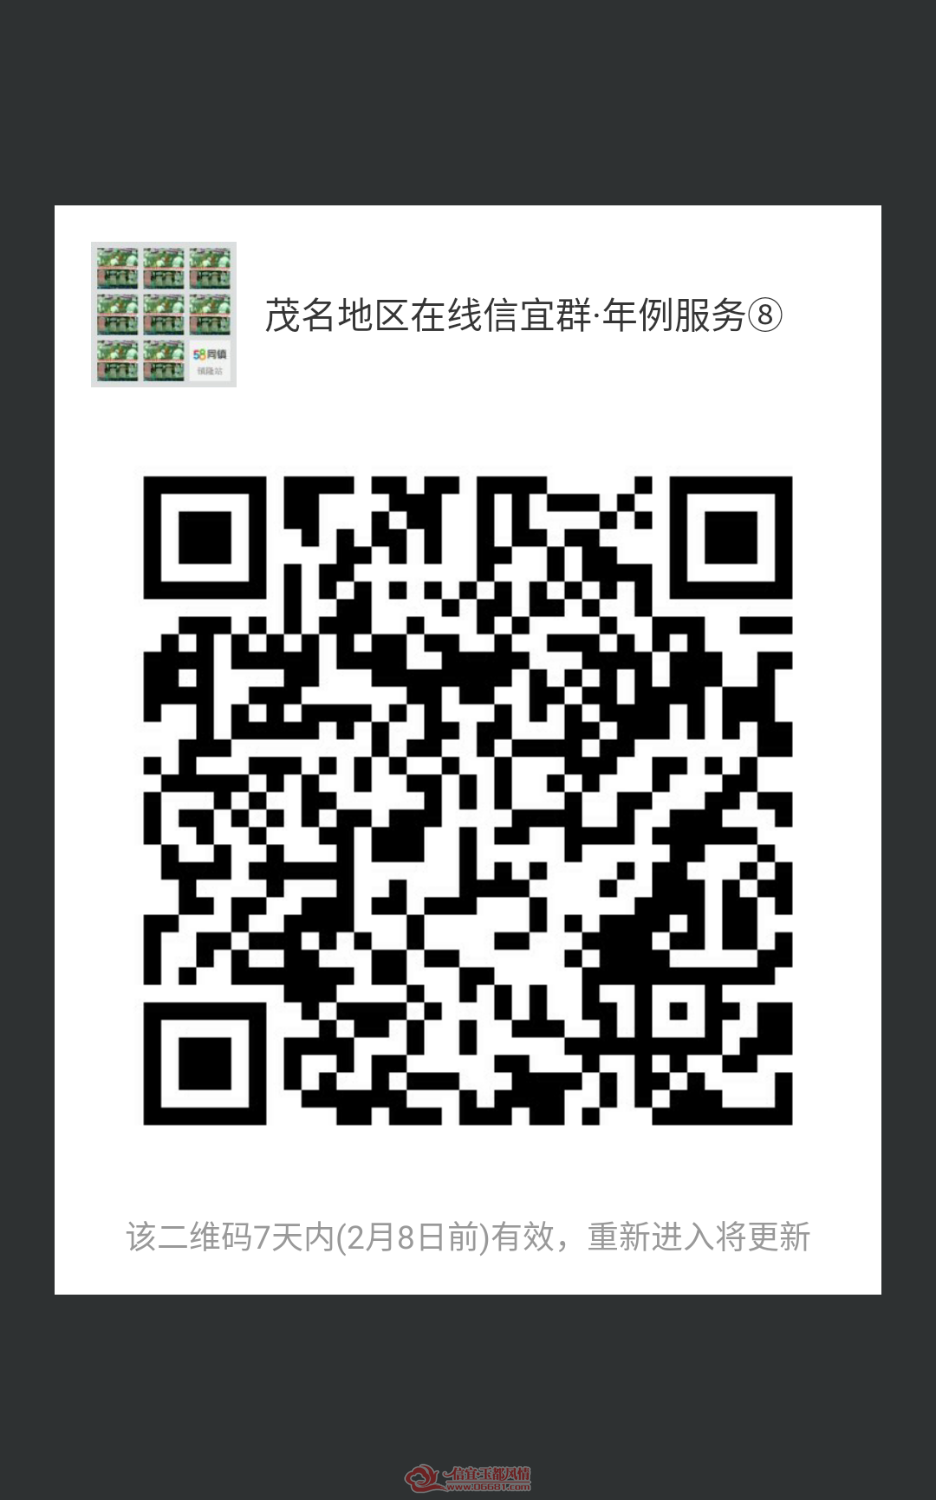 mmqrcode1548998617503.png